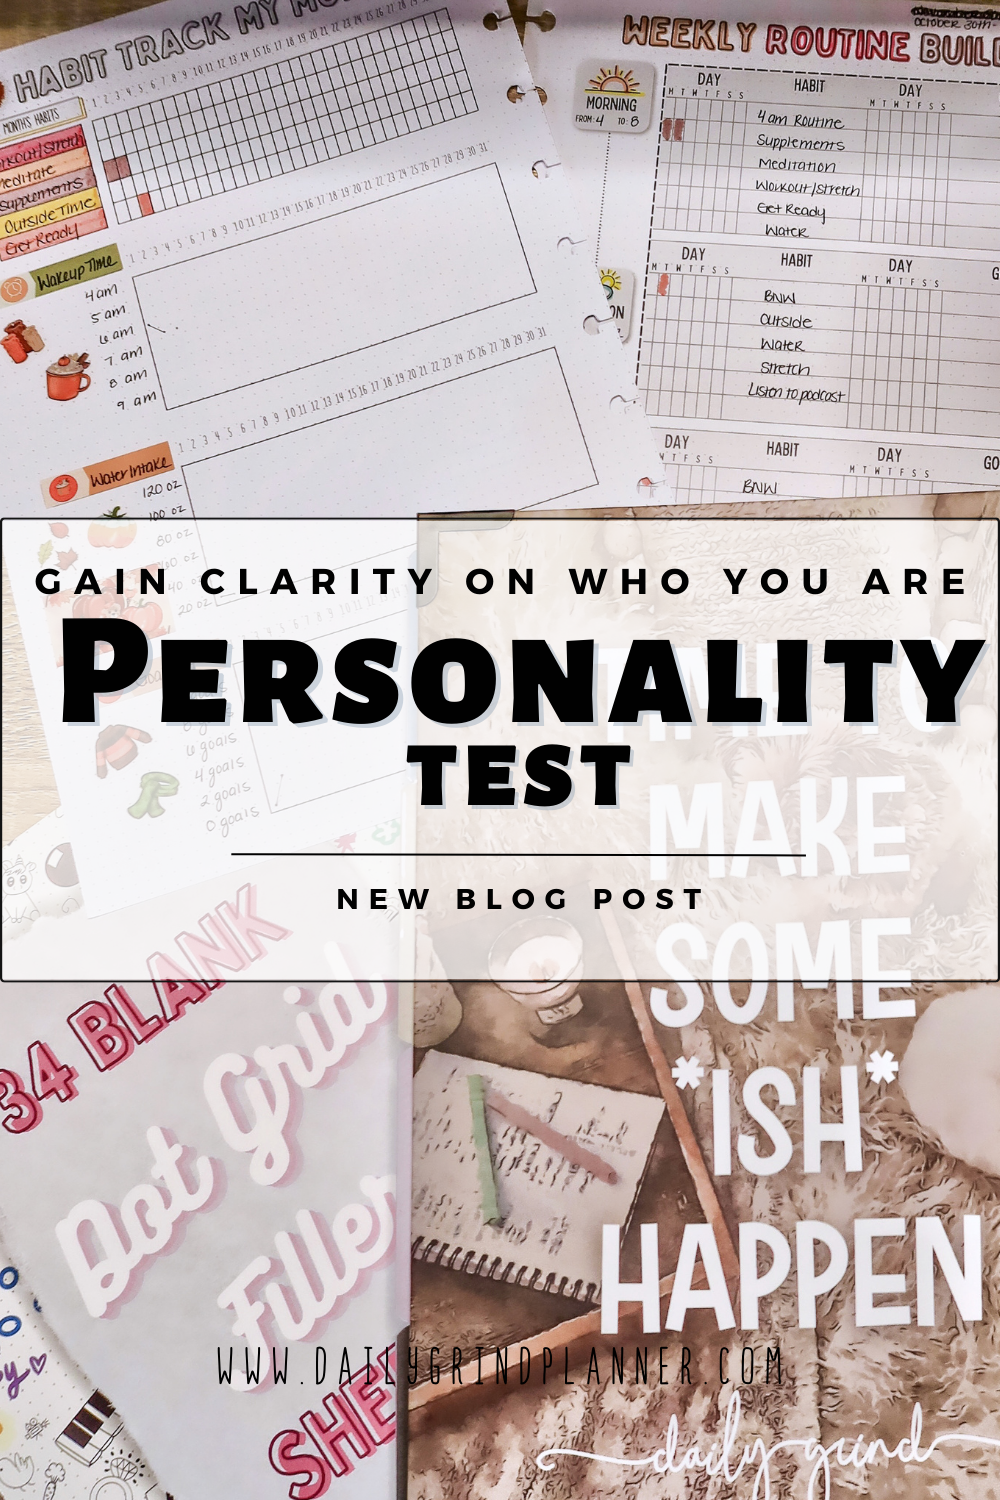 Personality Test : Gain Clarity on Who You Are